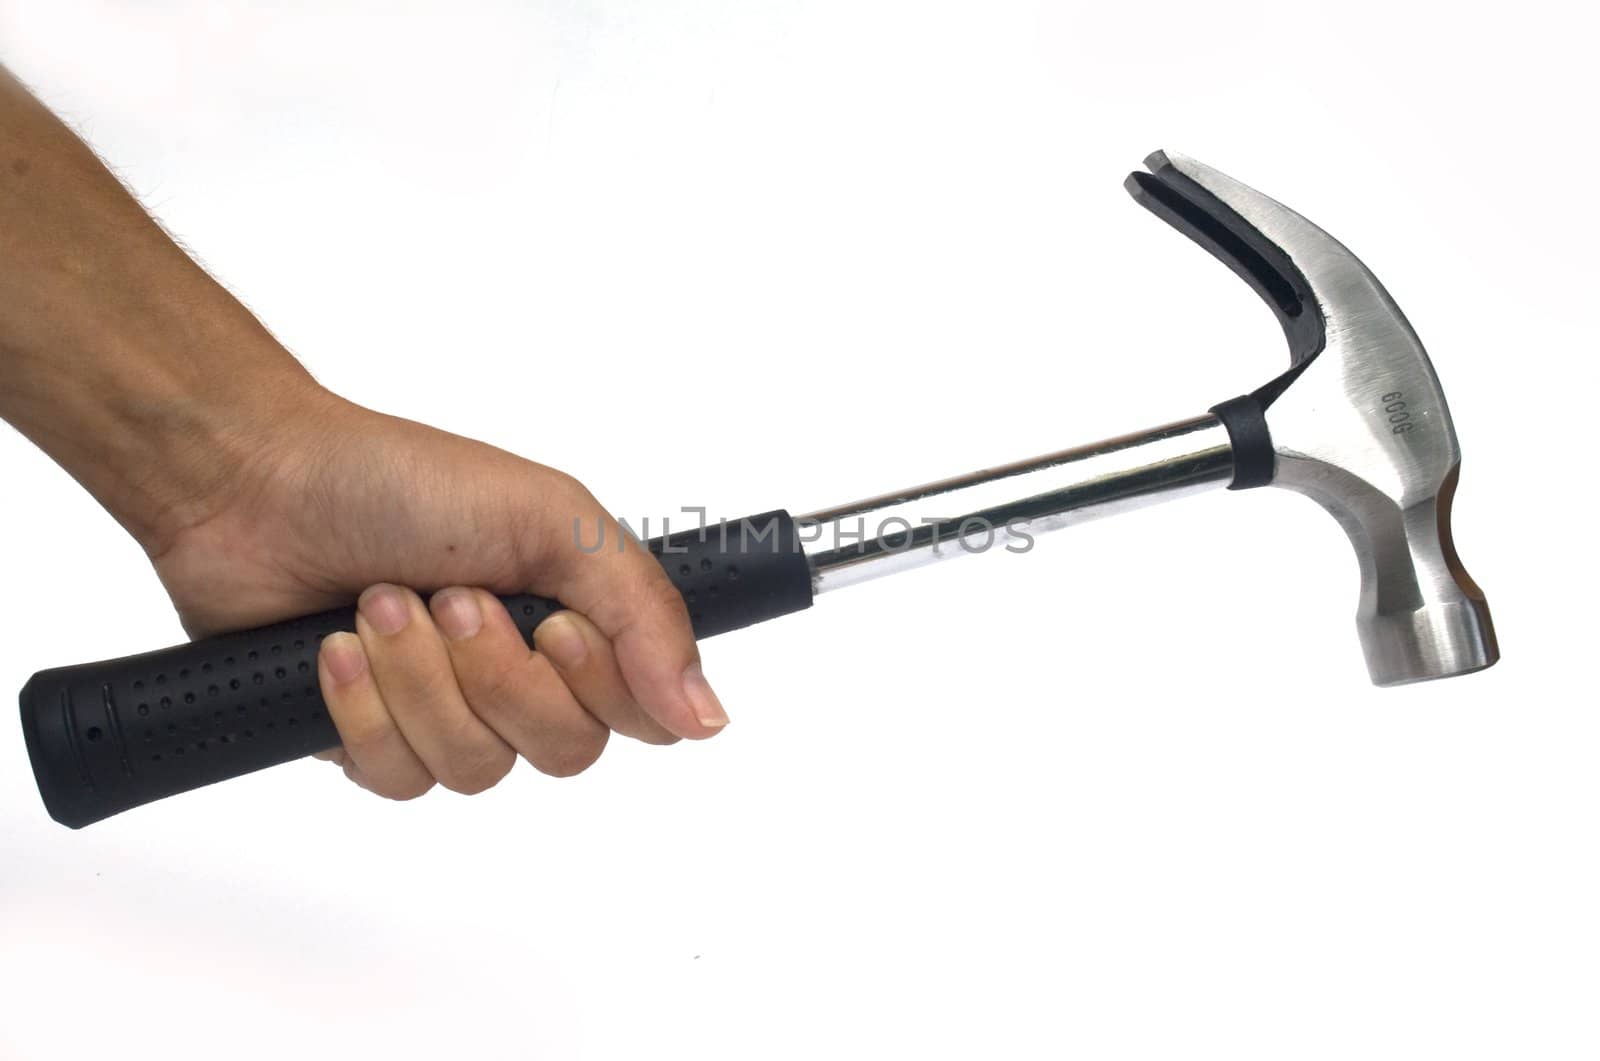 Hand holding a silver claw hammer against a white background